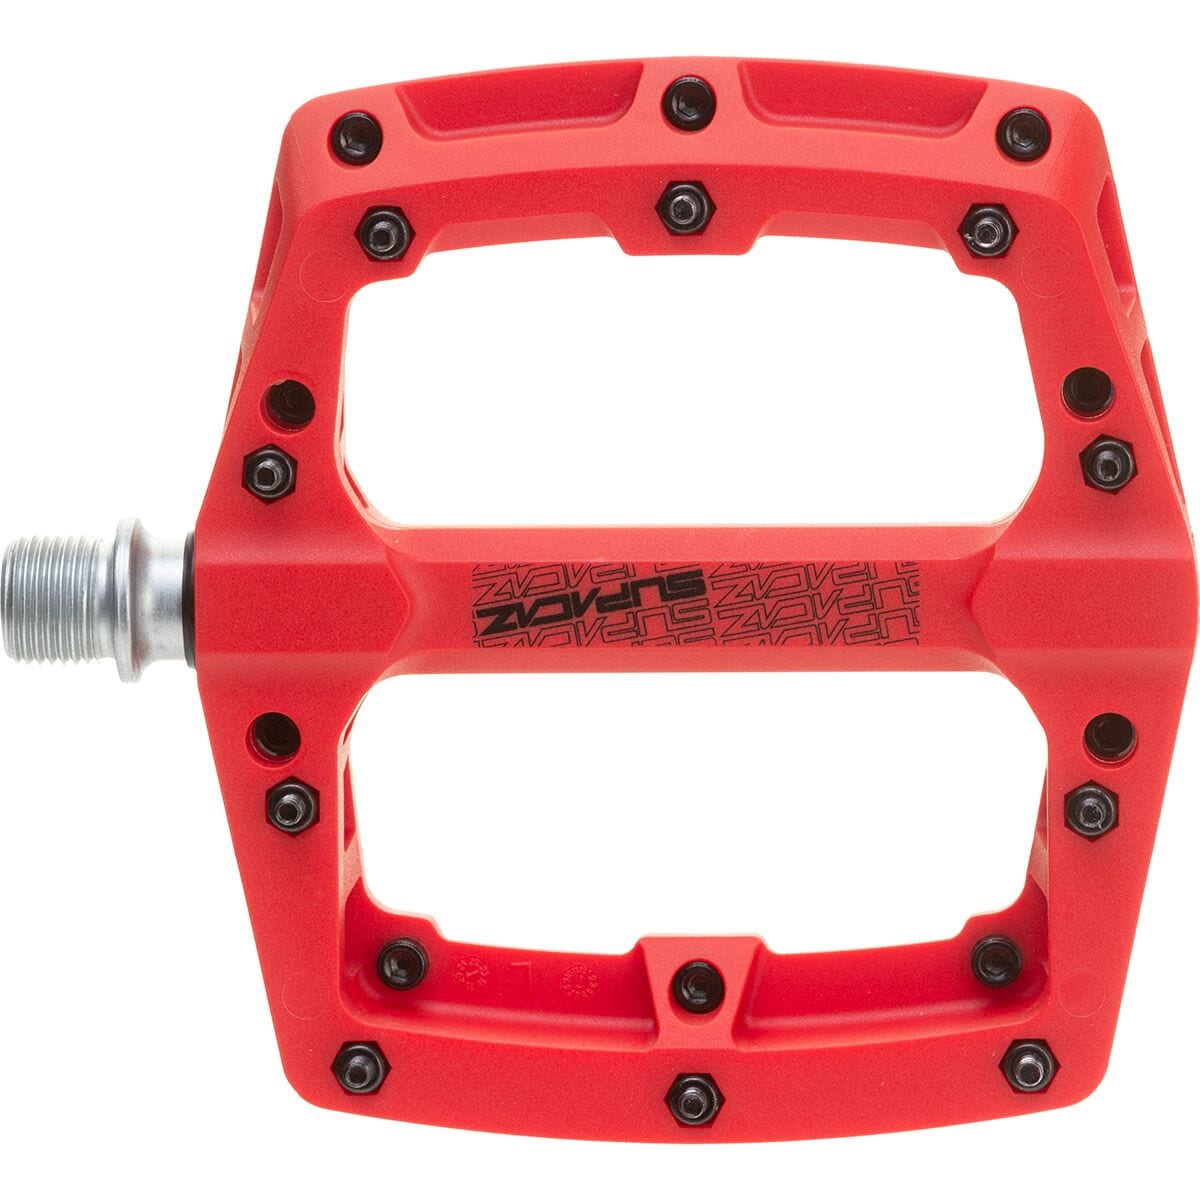 Supacaz Smash DH Pedals Red, One Size